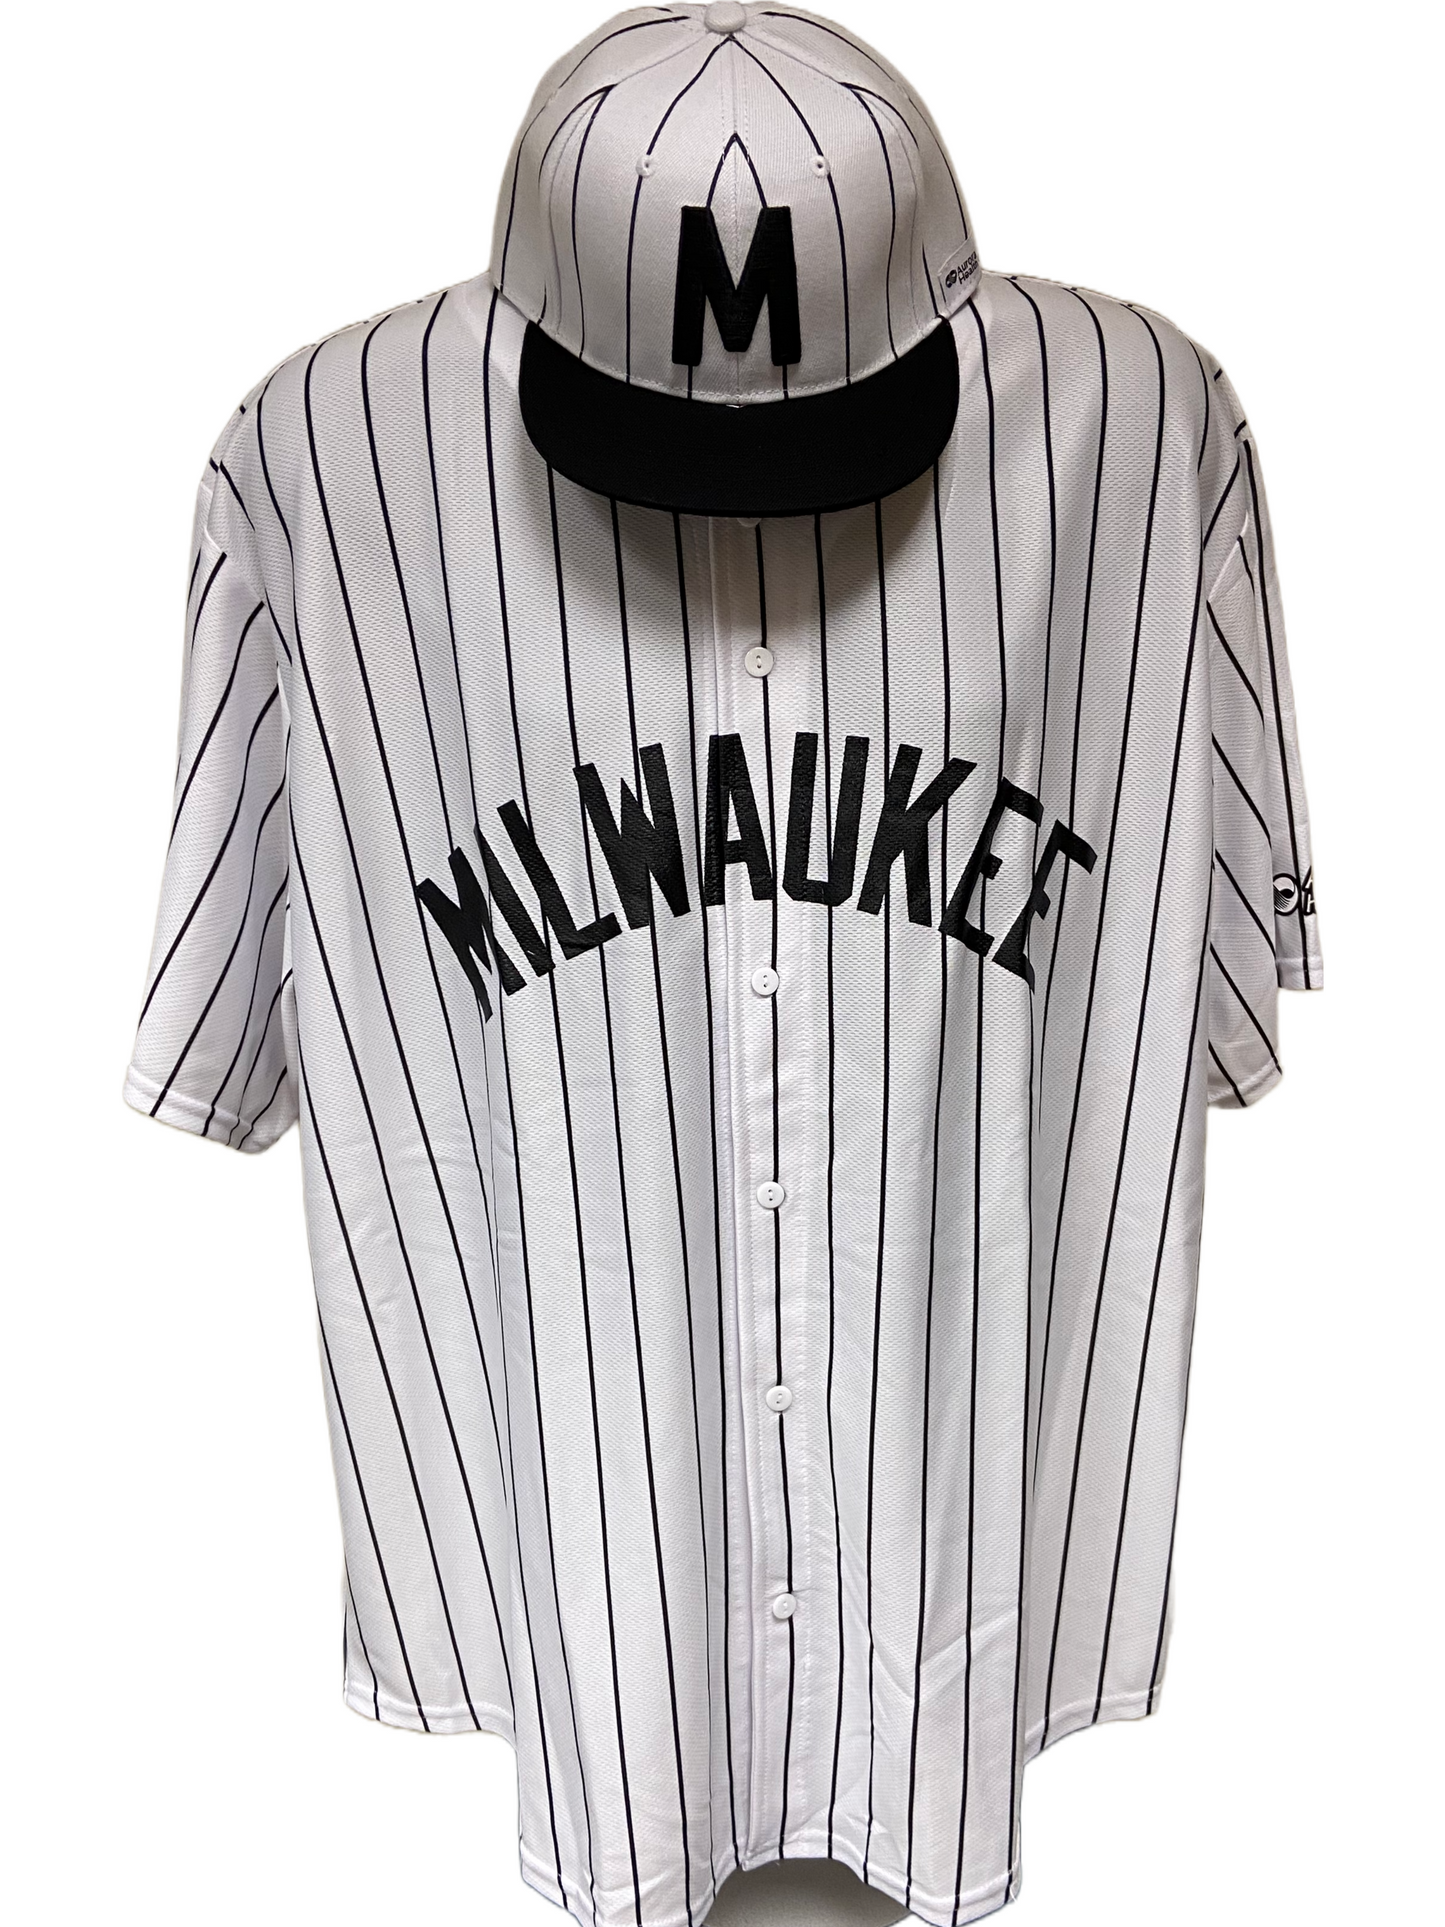 Milwaukee Baseball Jersey & Snap Back Hat - Limited Edition